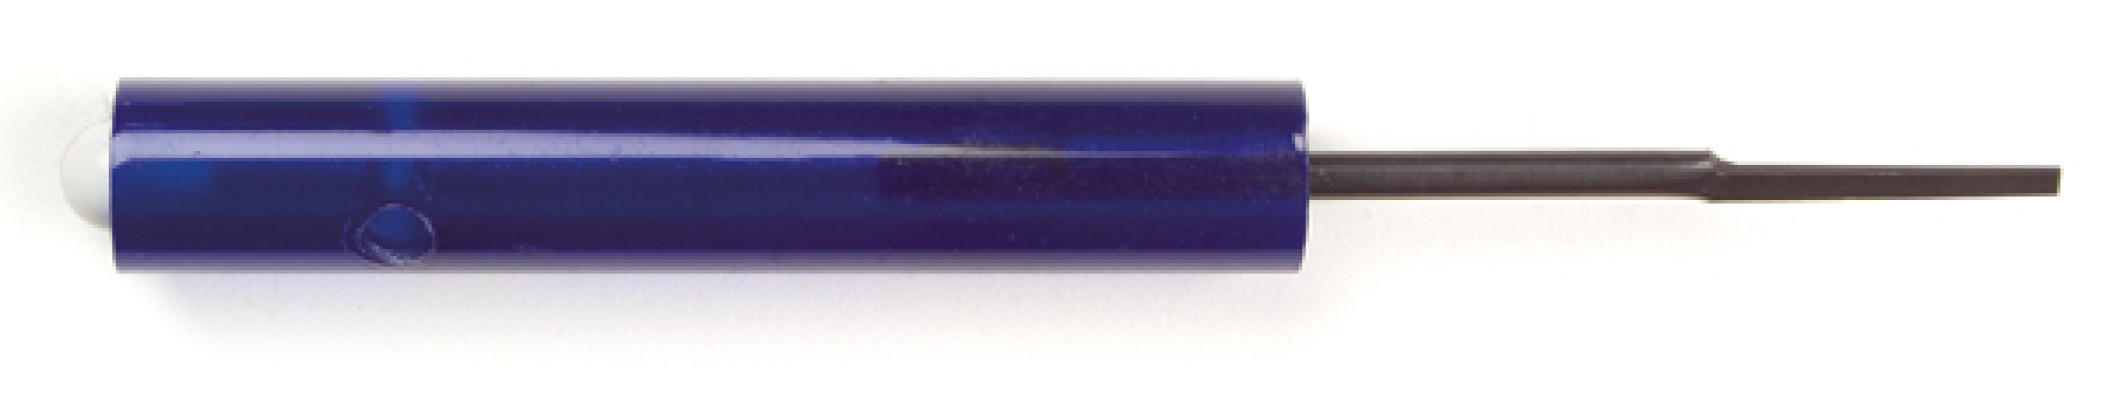 Image of Removal Tool For "Metri; Pack" Terminals, Wide Blade, Blue from Grote. Part number: 83-6522